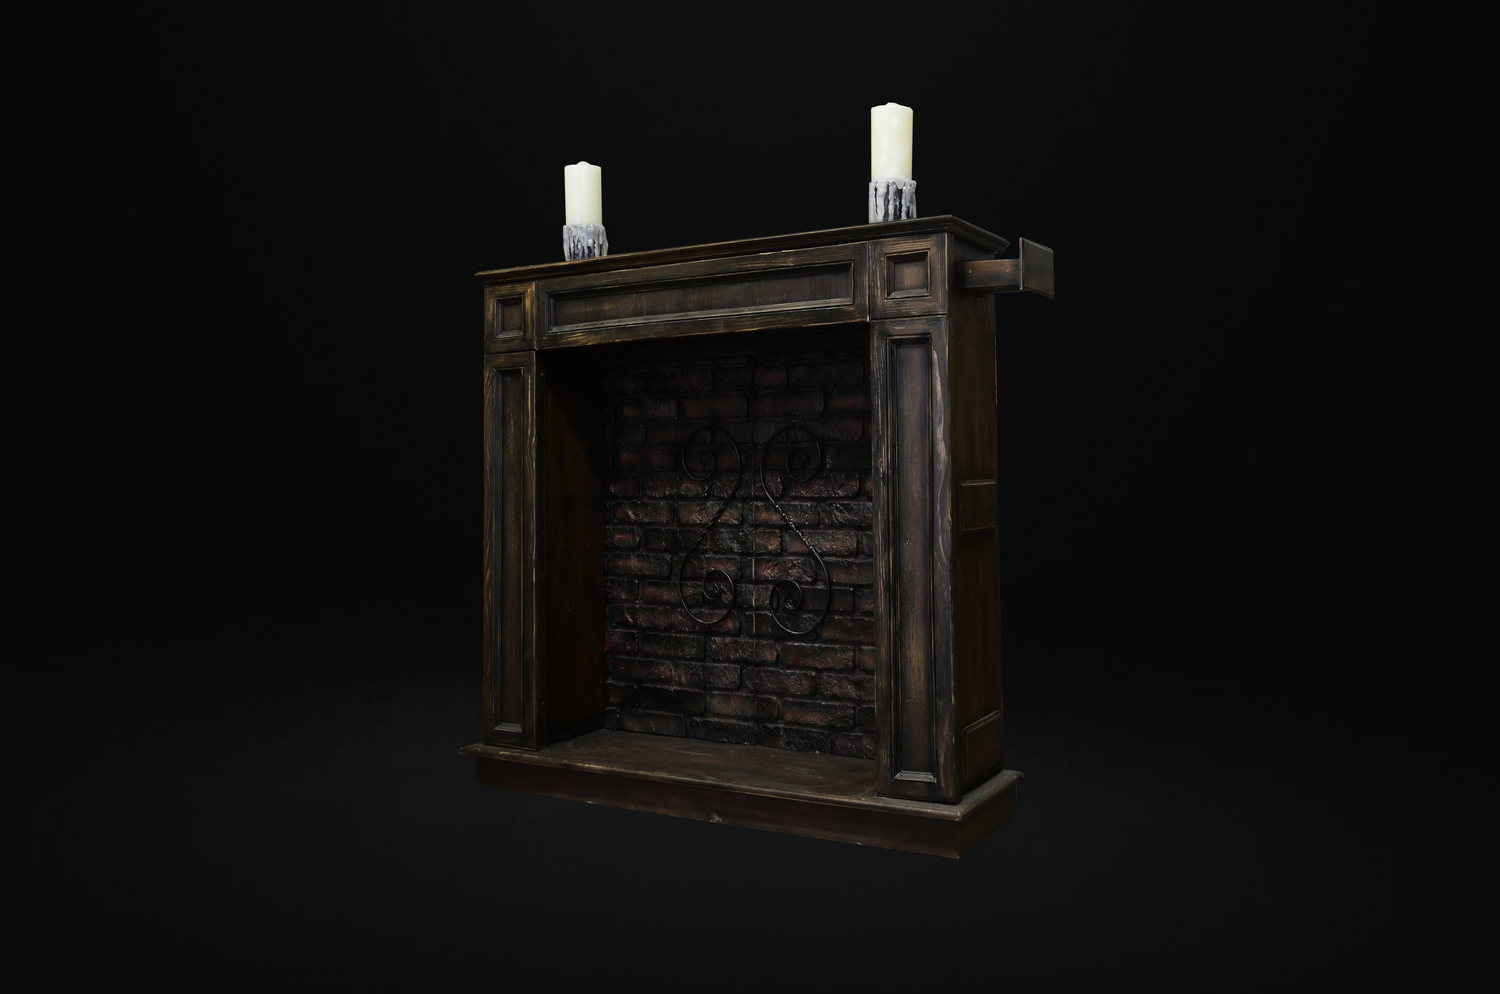 <p><span style="font-weight: bold;">Secret passage for quest room fireplace</span><br></p>